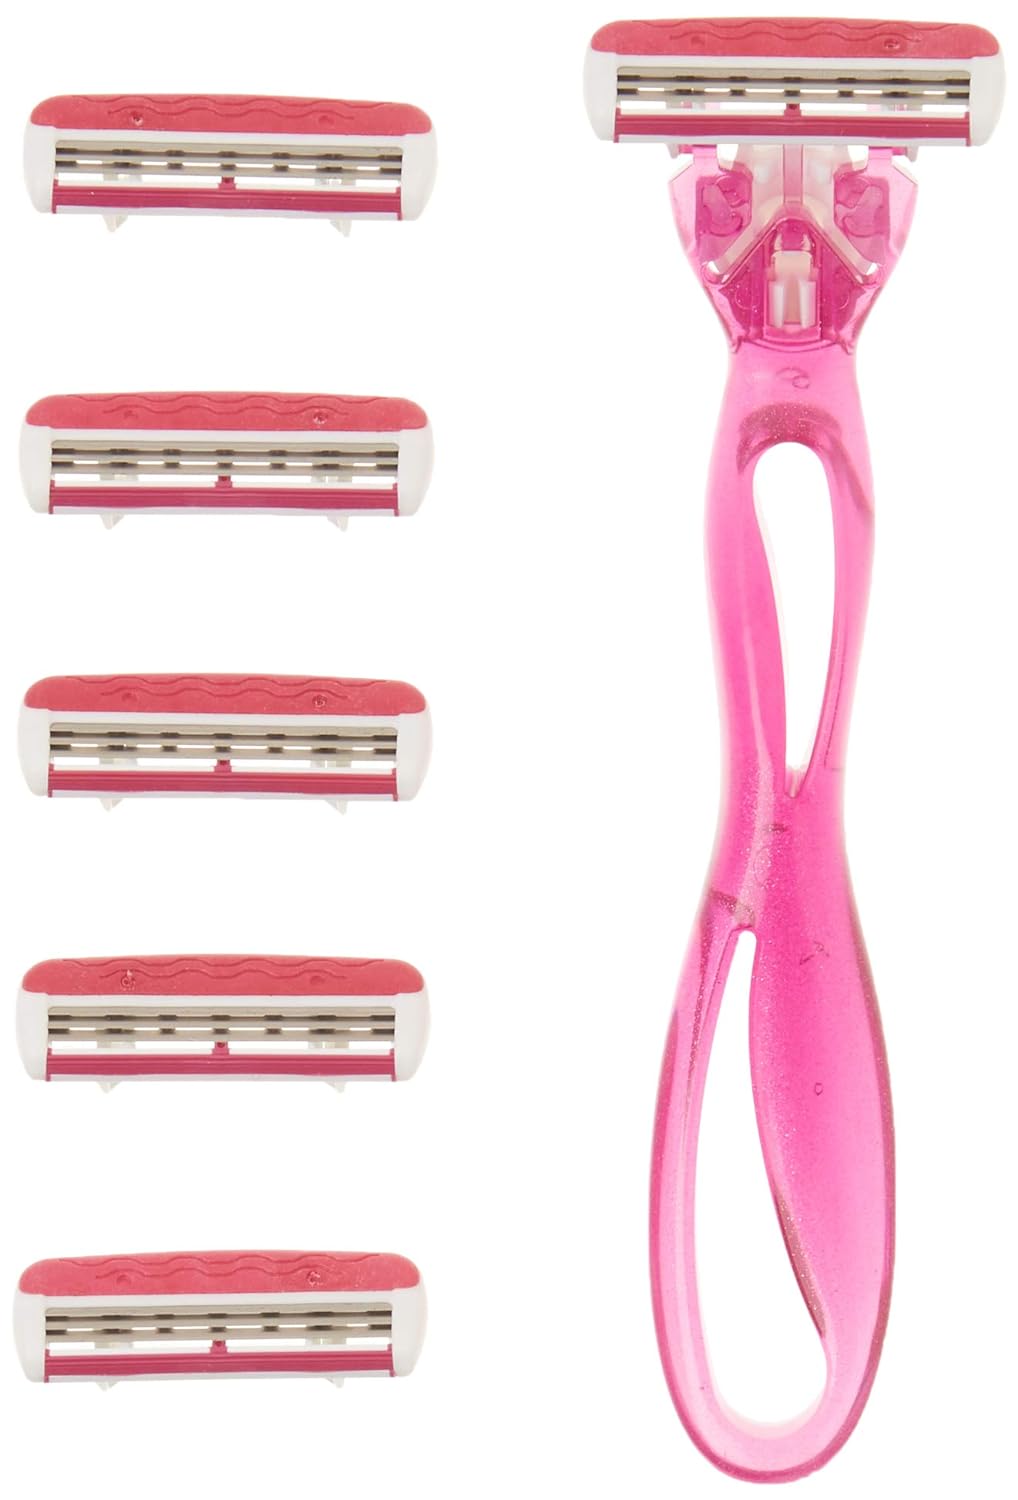 BIC Click 3 Soleil Women's Disposable Razors, 3 Blades With a Moisture Strip For a Smoother Shave, 12 Piece Razor Set